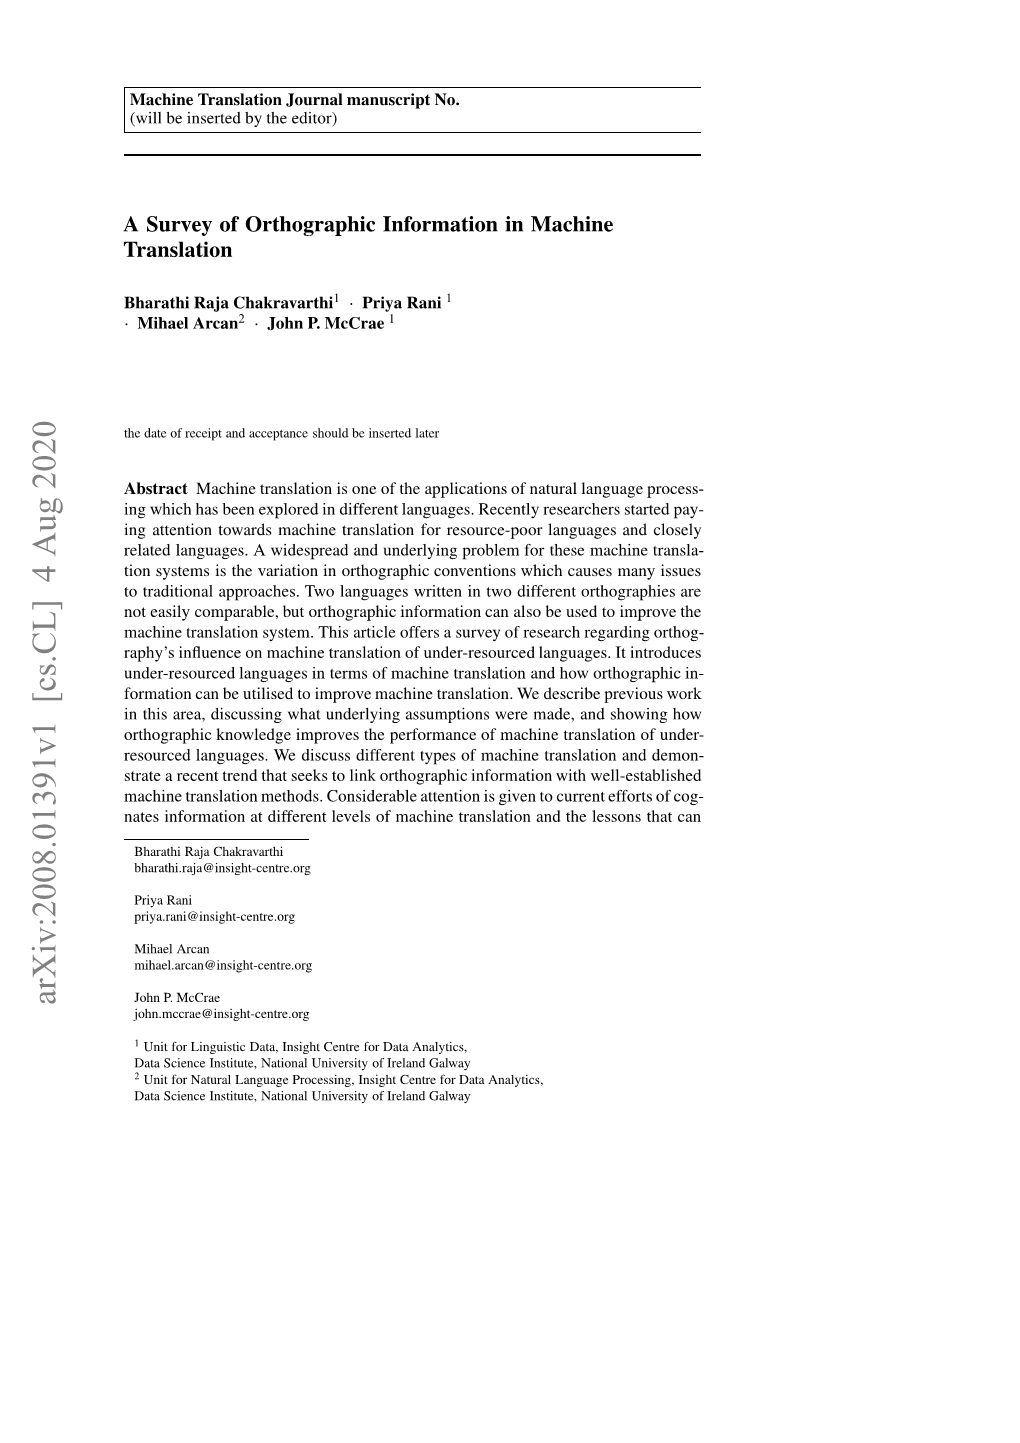 A Survey of Orthographic Information in Machine Translation 3